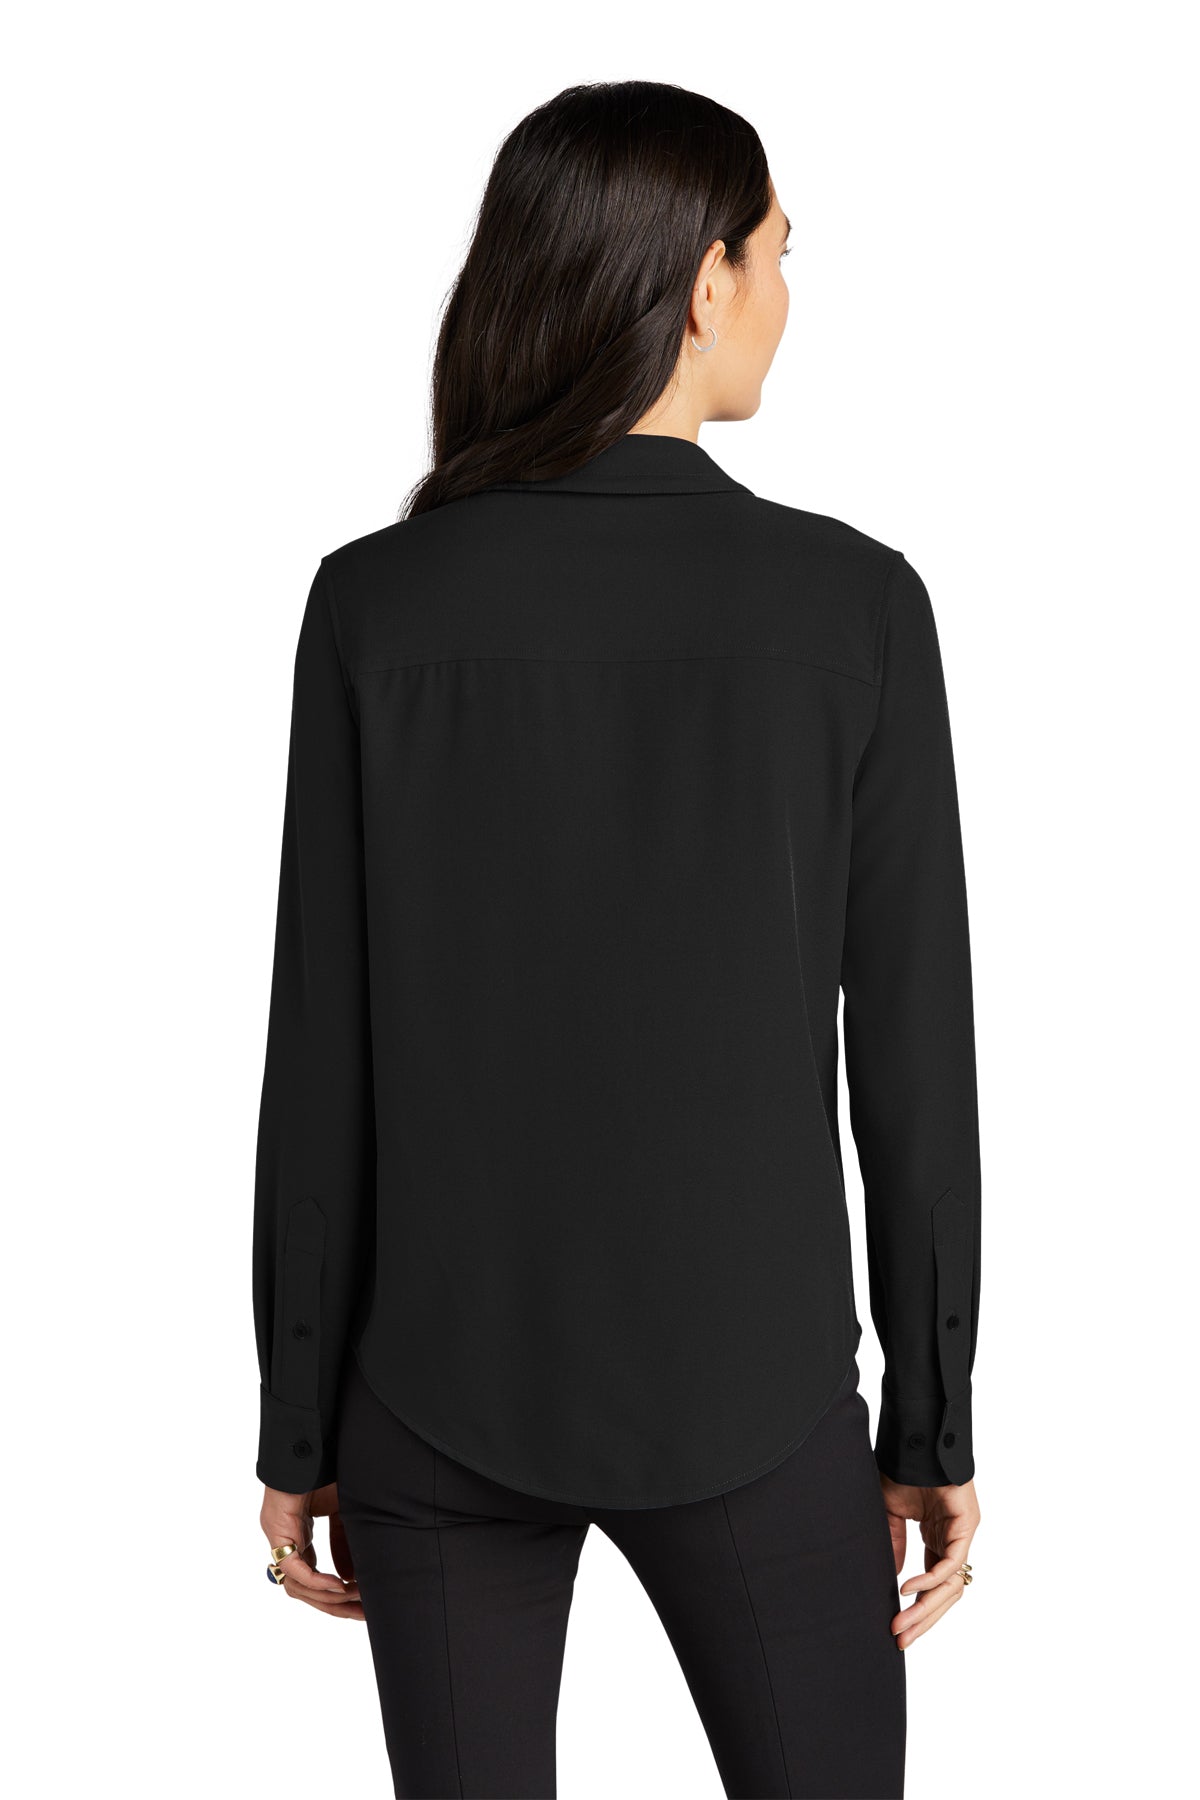 Monique Button Up Long Sleeve Blouse - Deep Black (Ships in 1-2 Weeks)